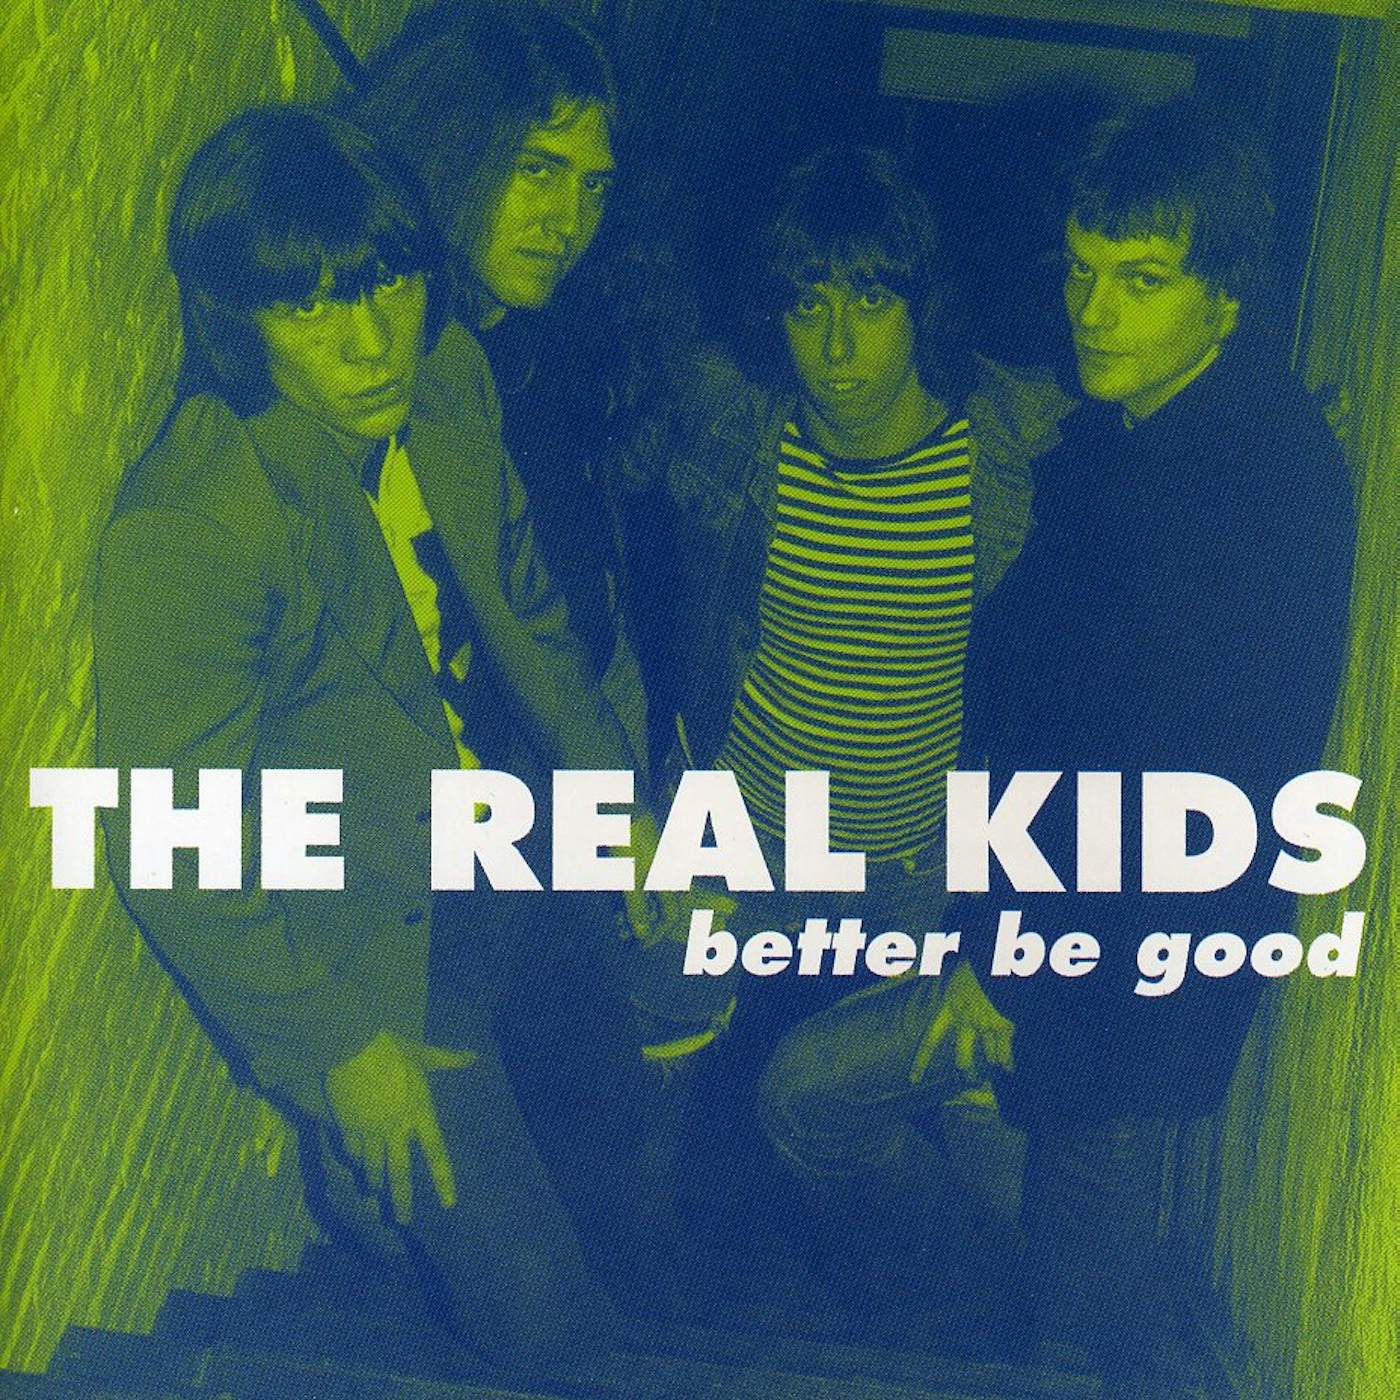 The Real Kids BETTER BE GOOD CD